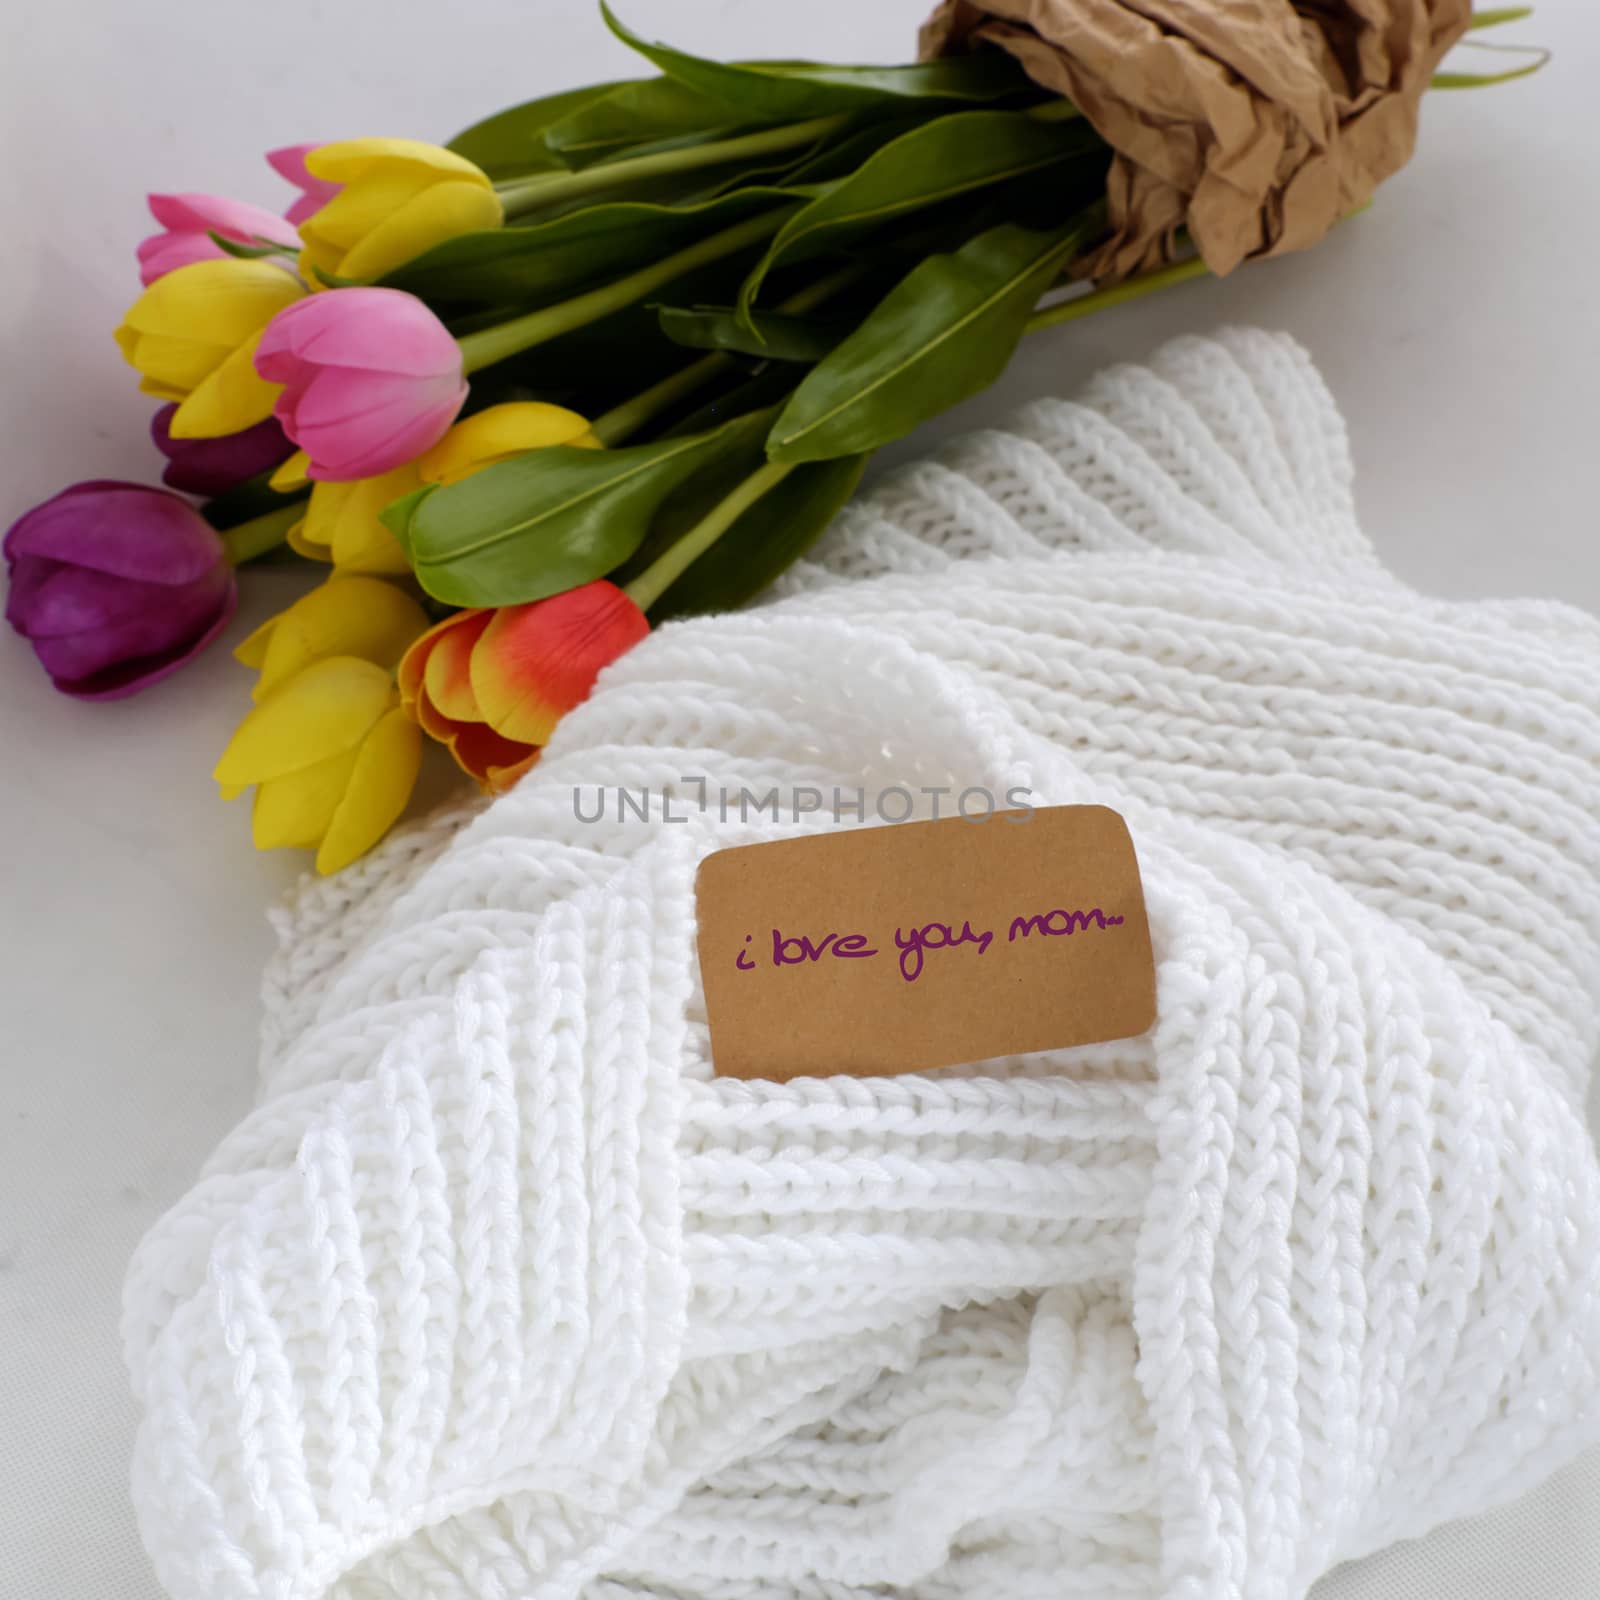 Happy mother day with meaningful handmade gift include knitted white scarf and tulip flower bouquet from clay, gratitude and thank mom for love in special day